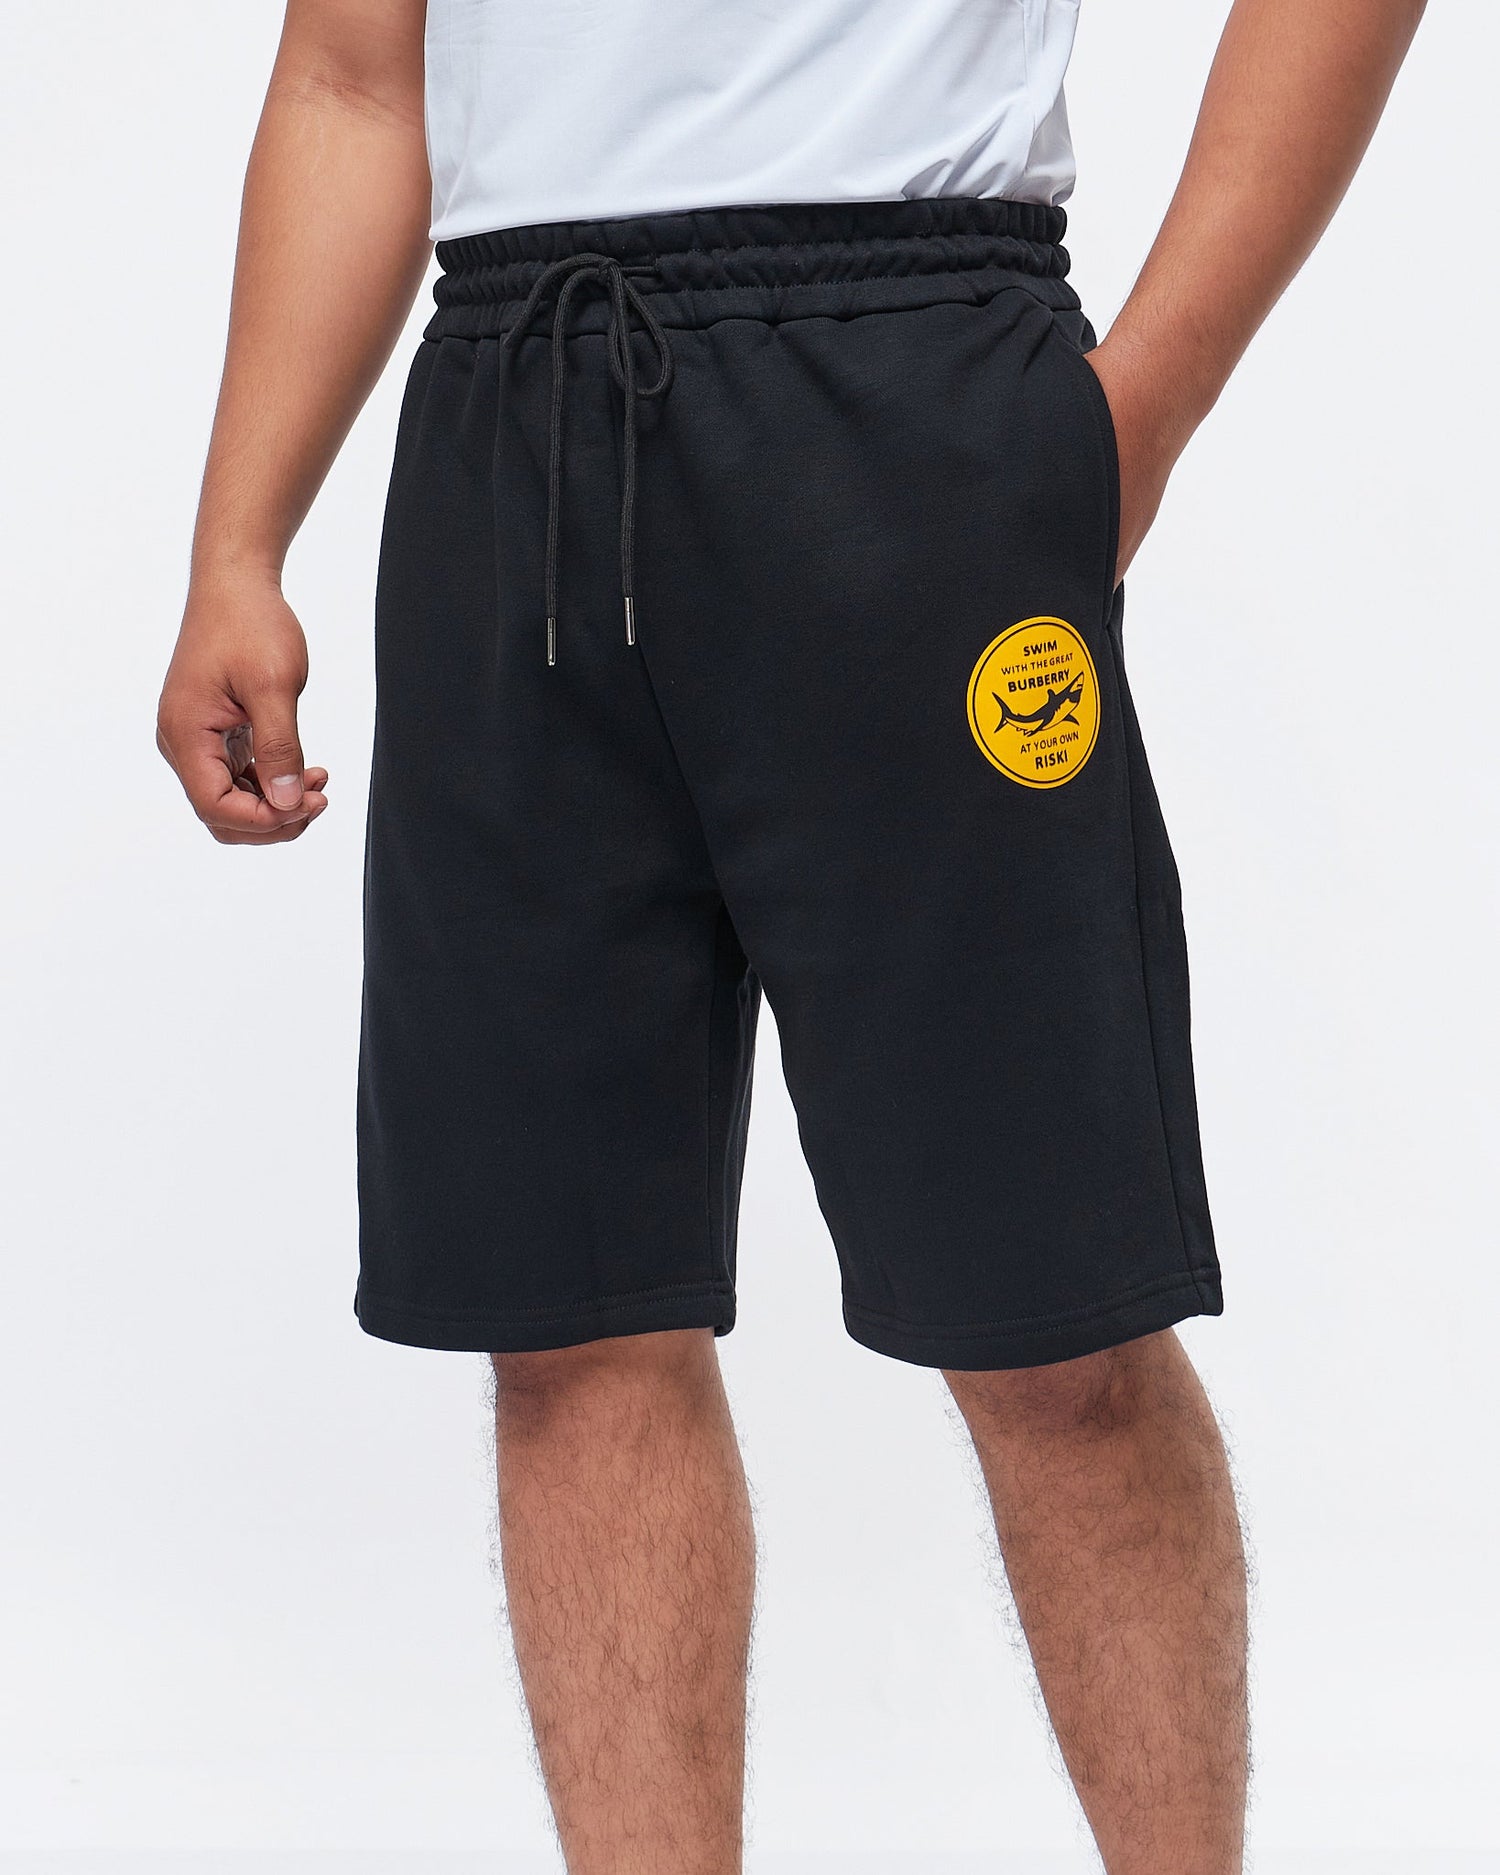 MOI OUTFIT-Yellow Fish Embroidered Men Shorts 18.90